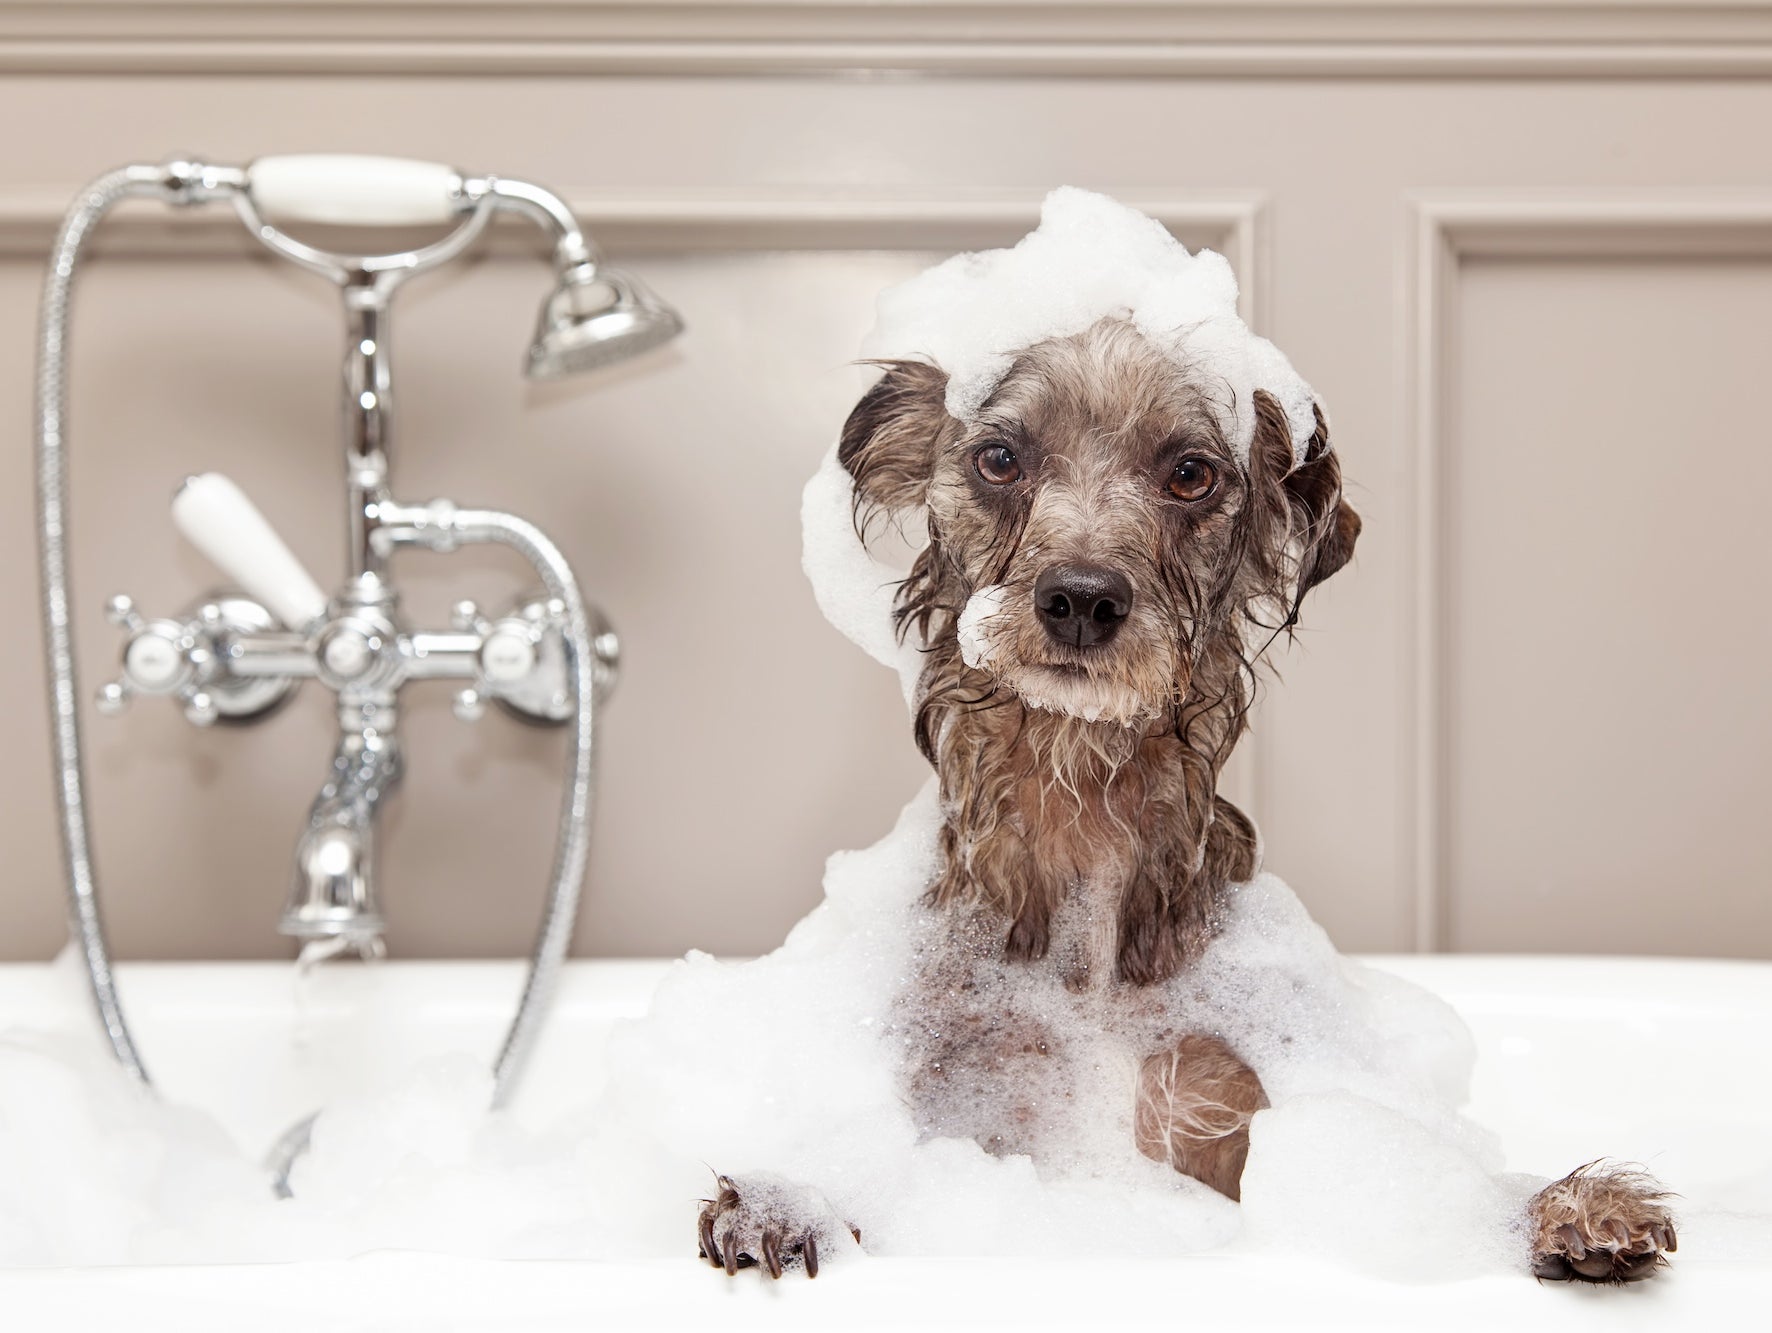 How often should a dog be bathed?